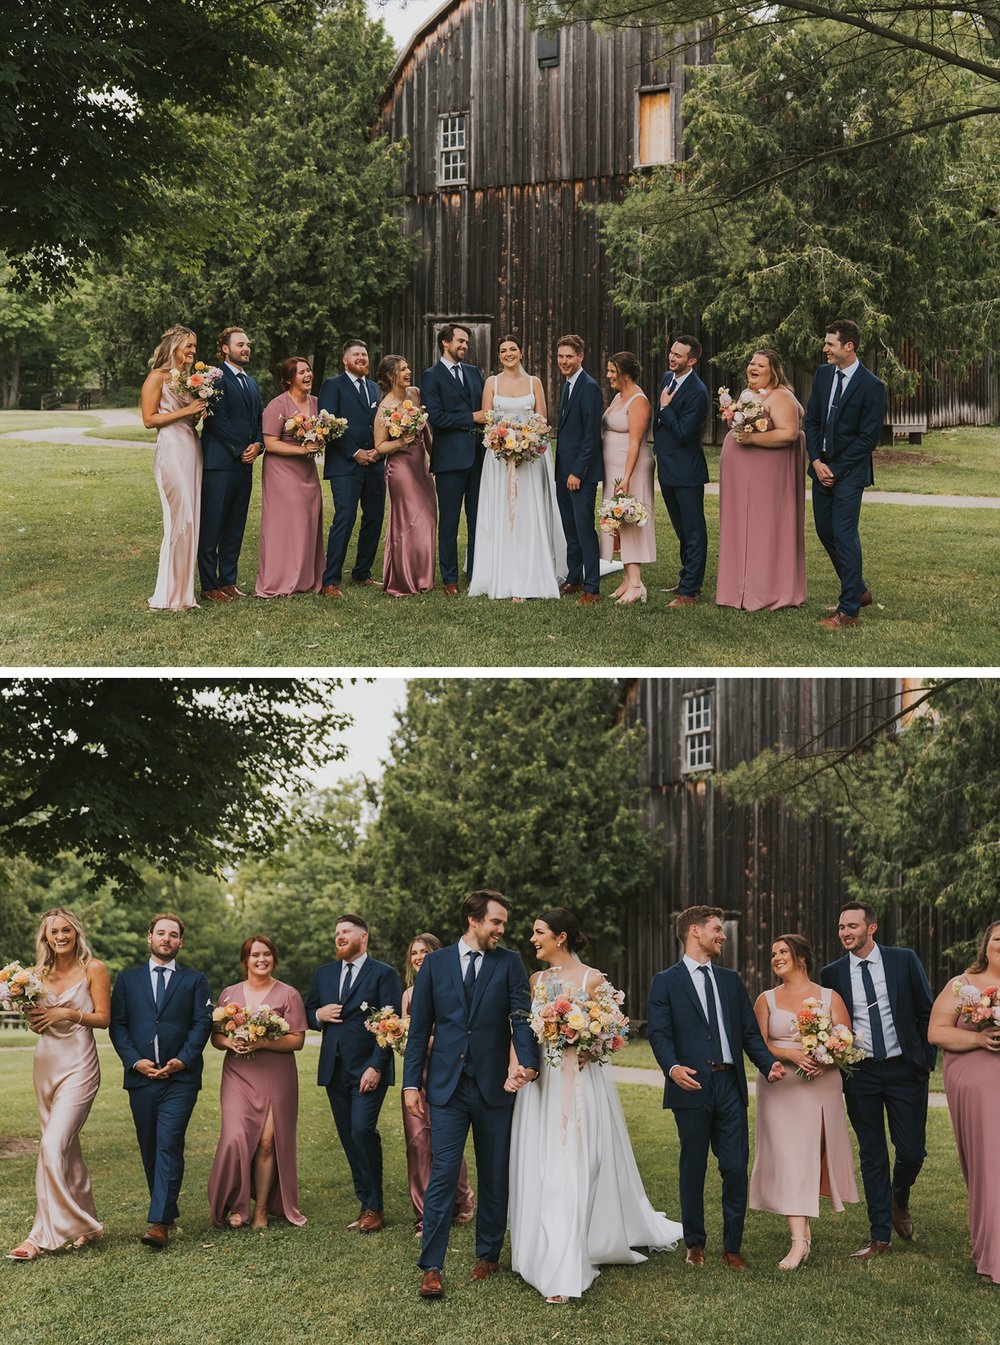 Bridal party portraits at Ball's Falls Conservation Area